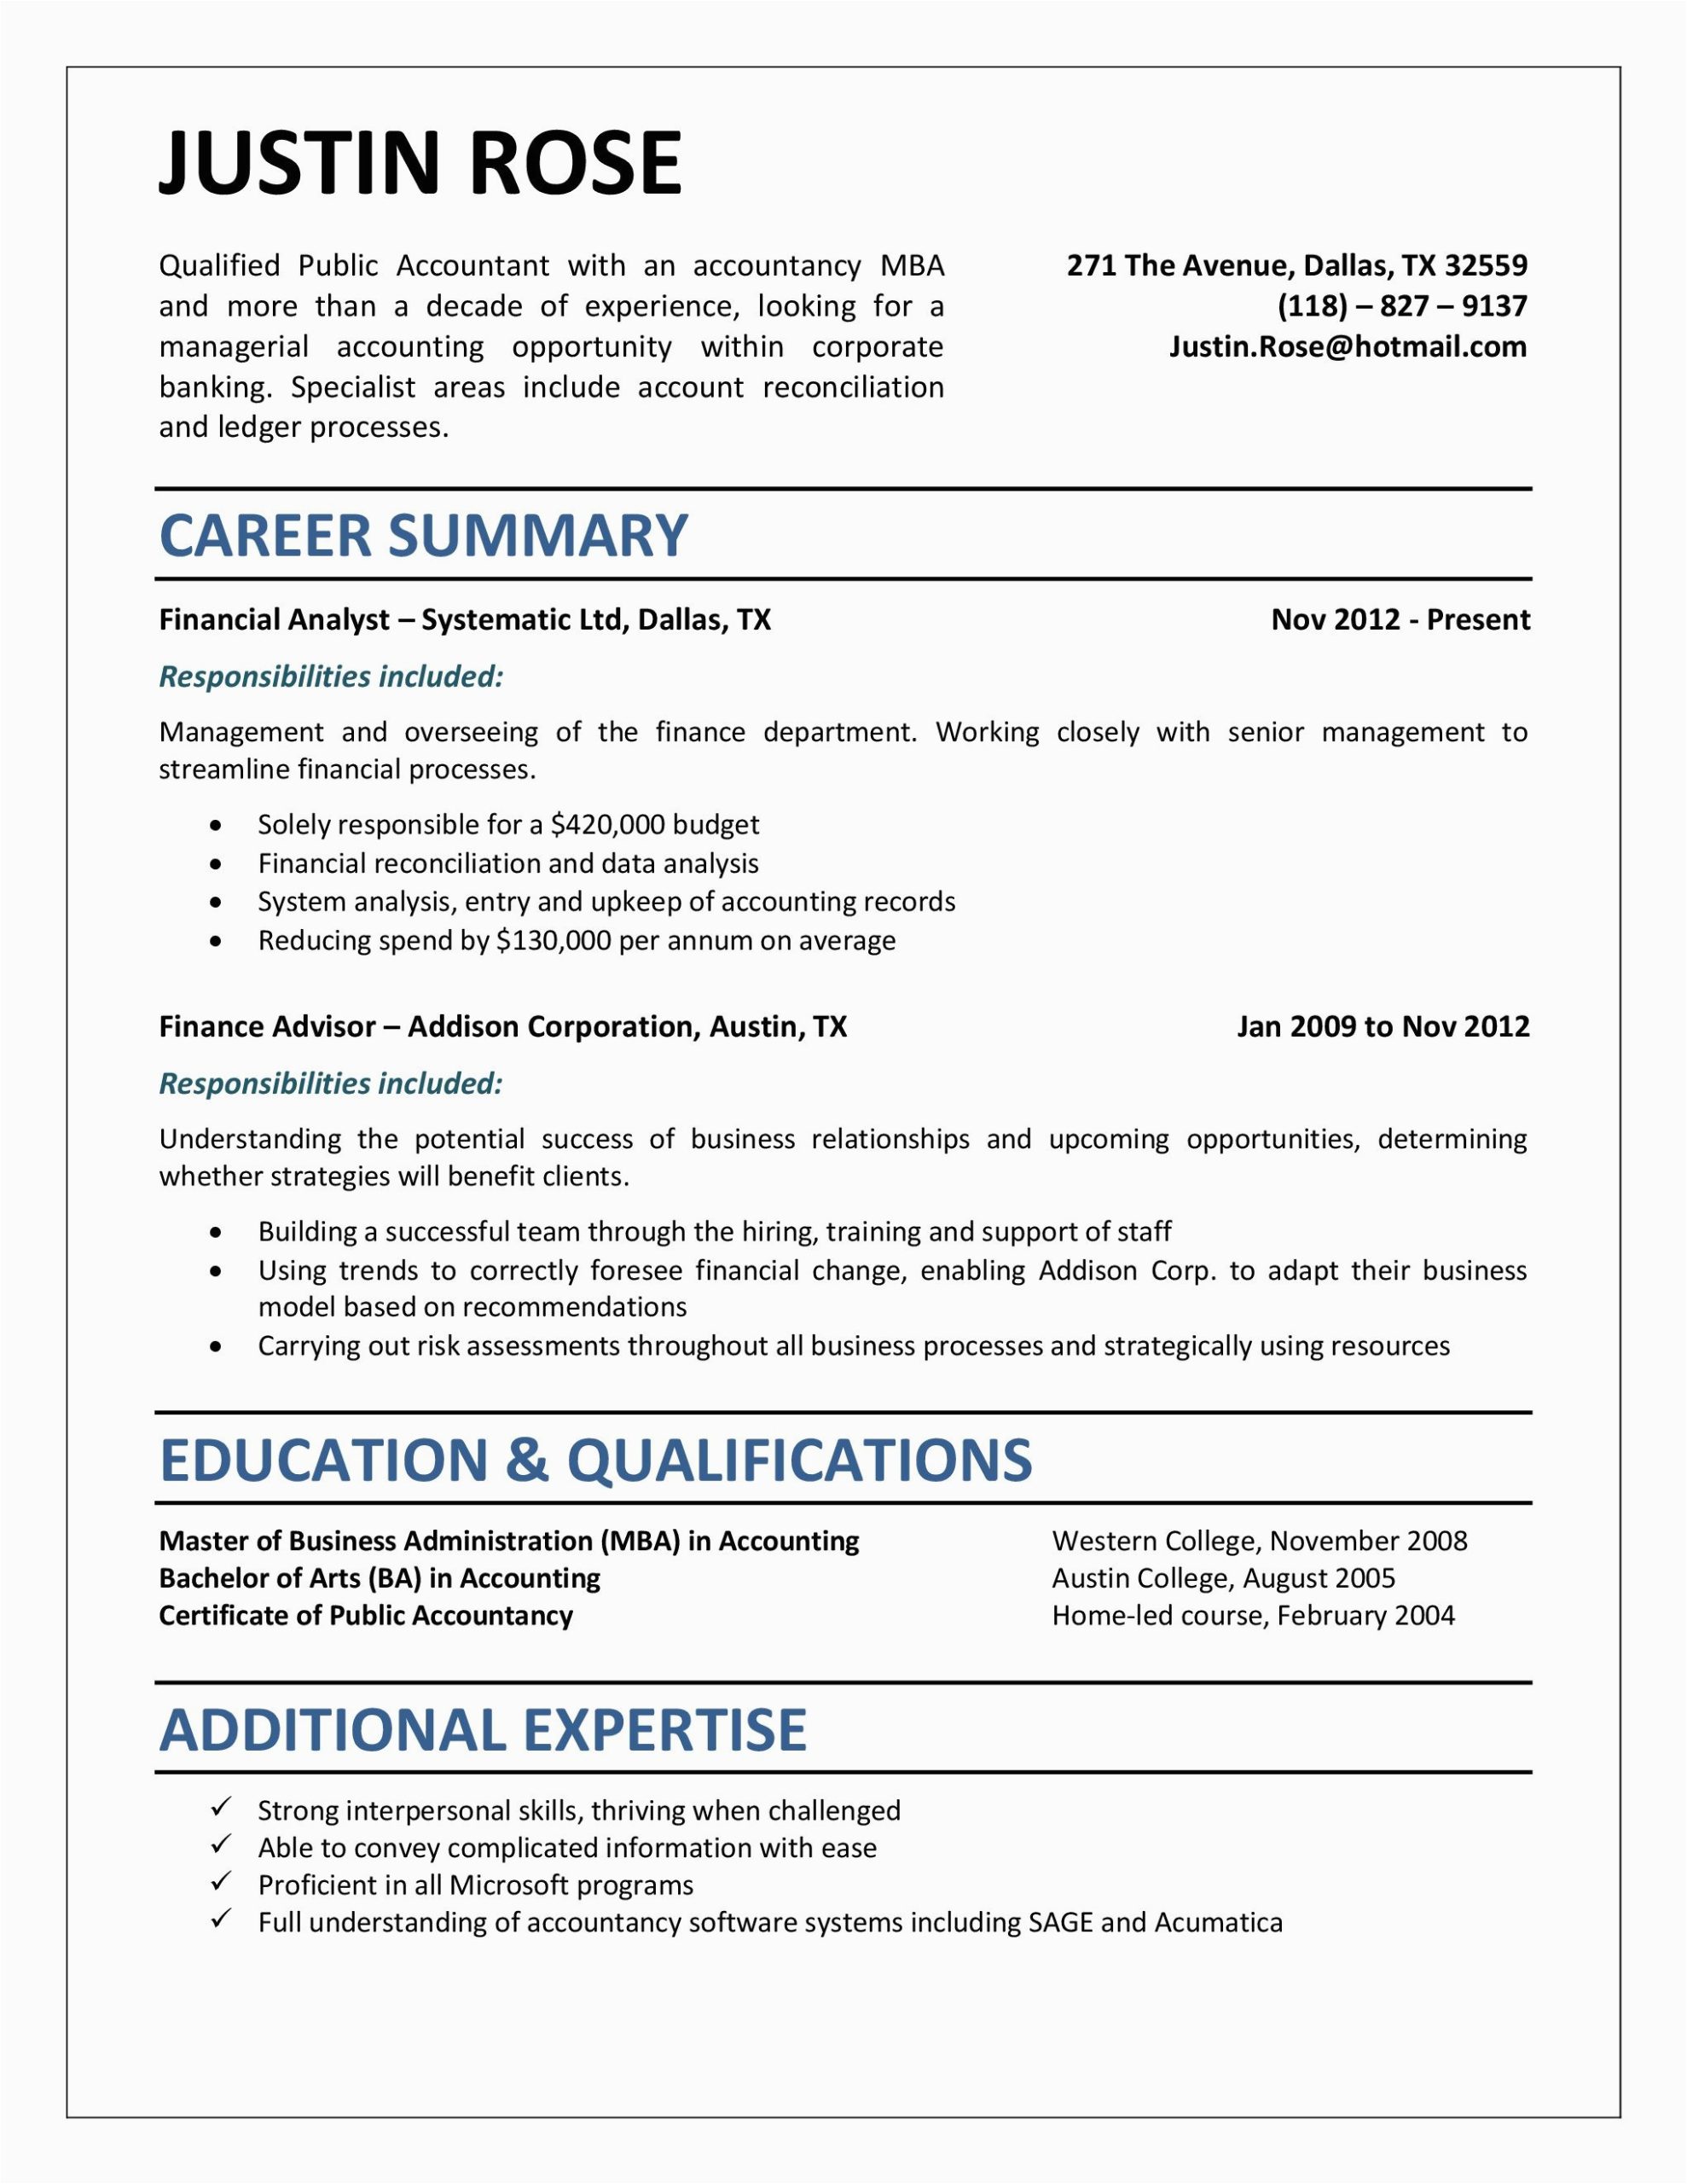 Sample Resumes for Entry Level Accounting Jobs Entry Level Accounting Resume Pdf Resume